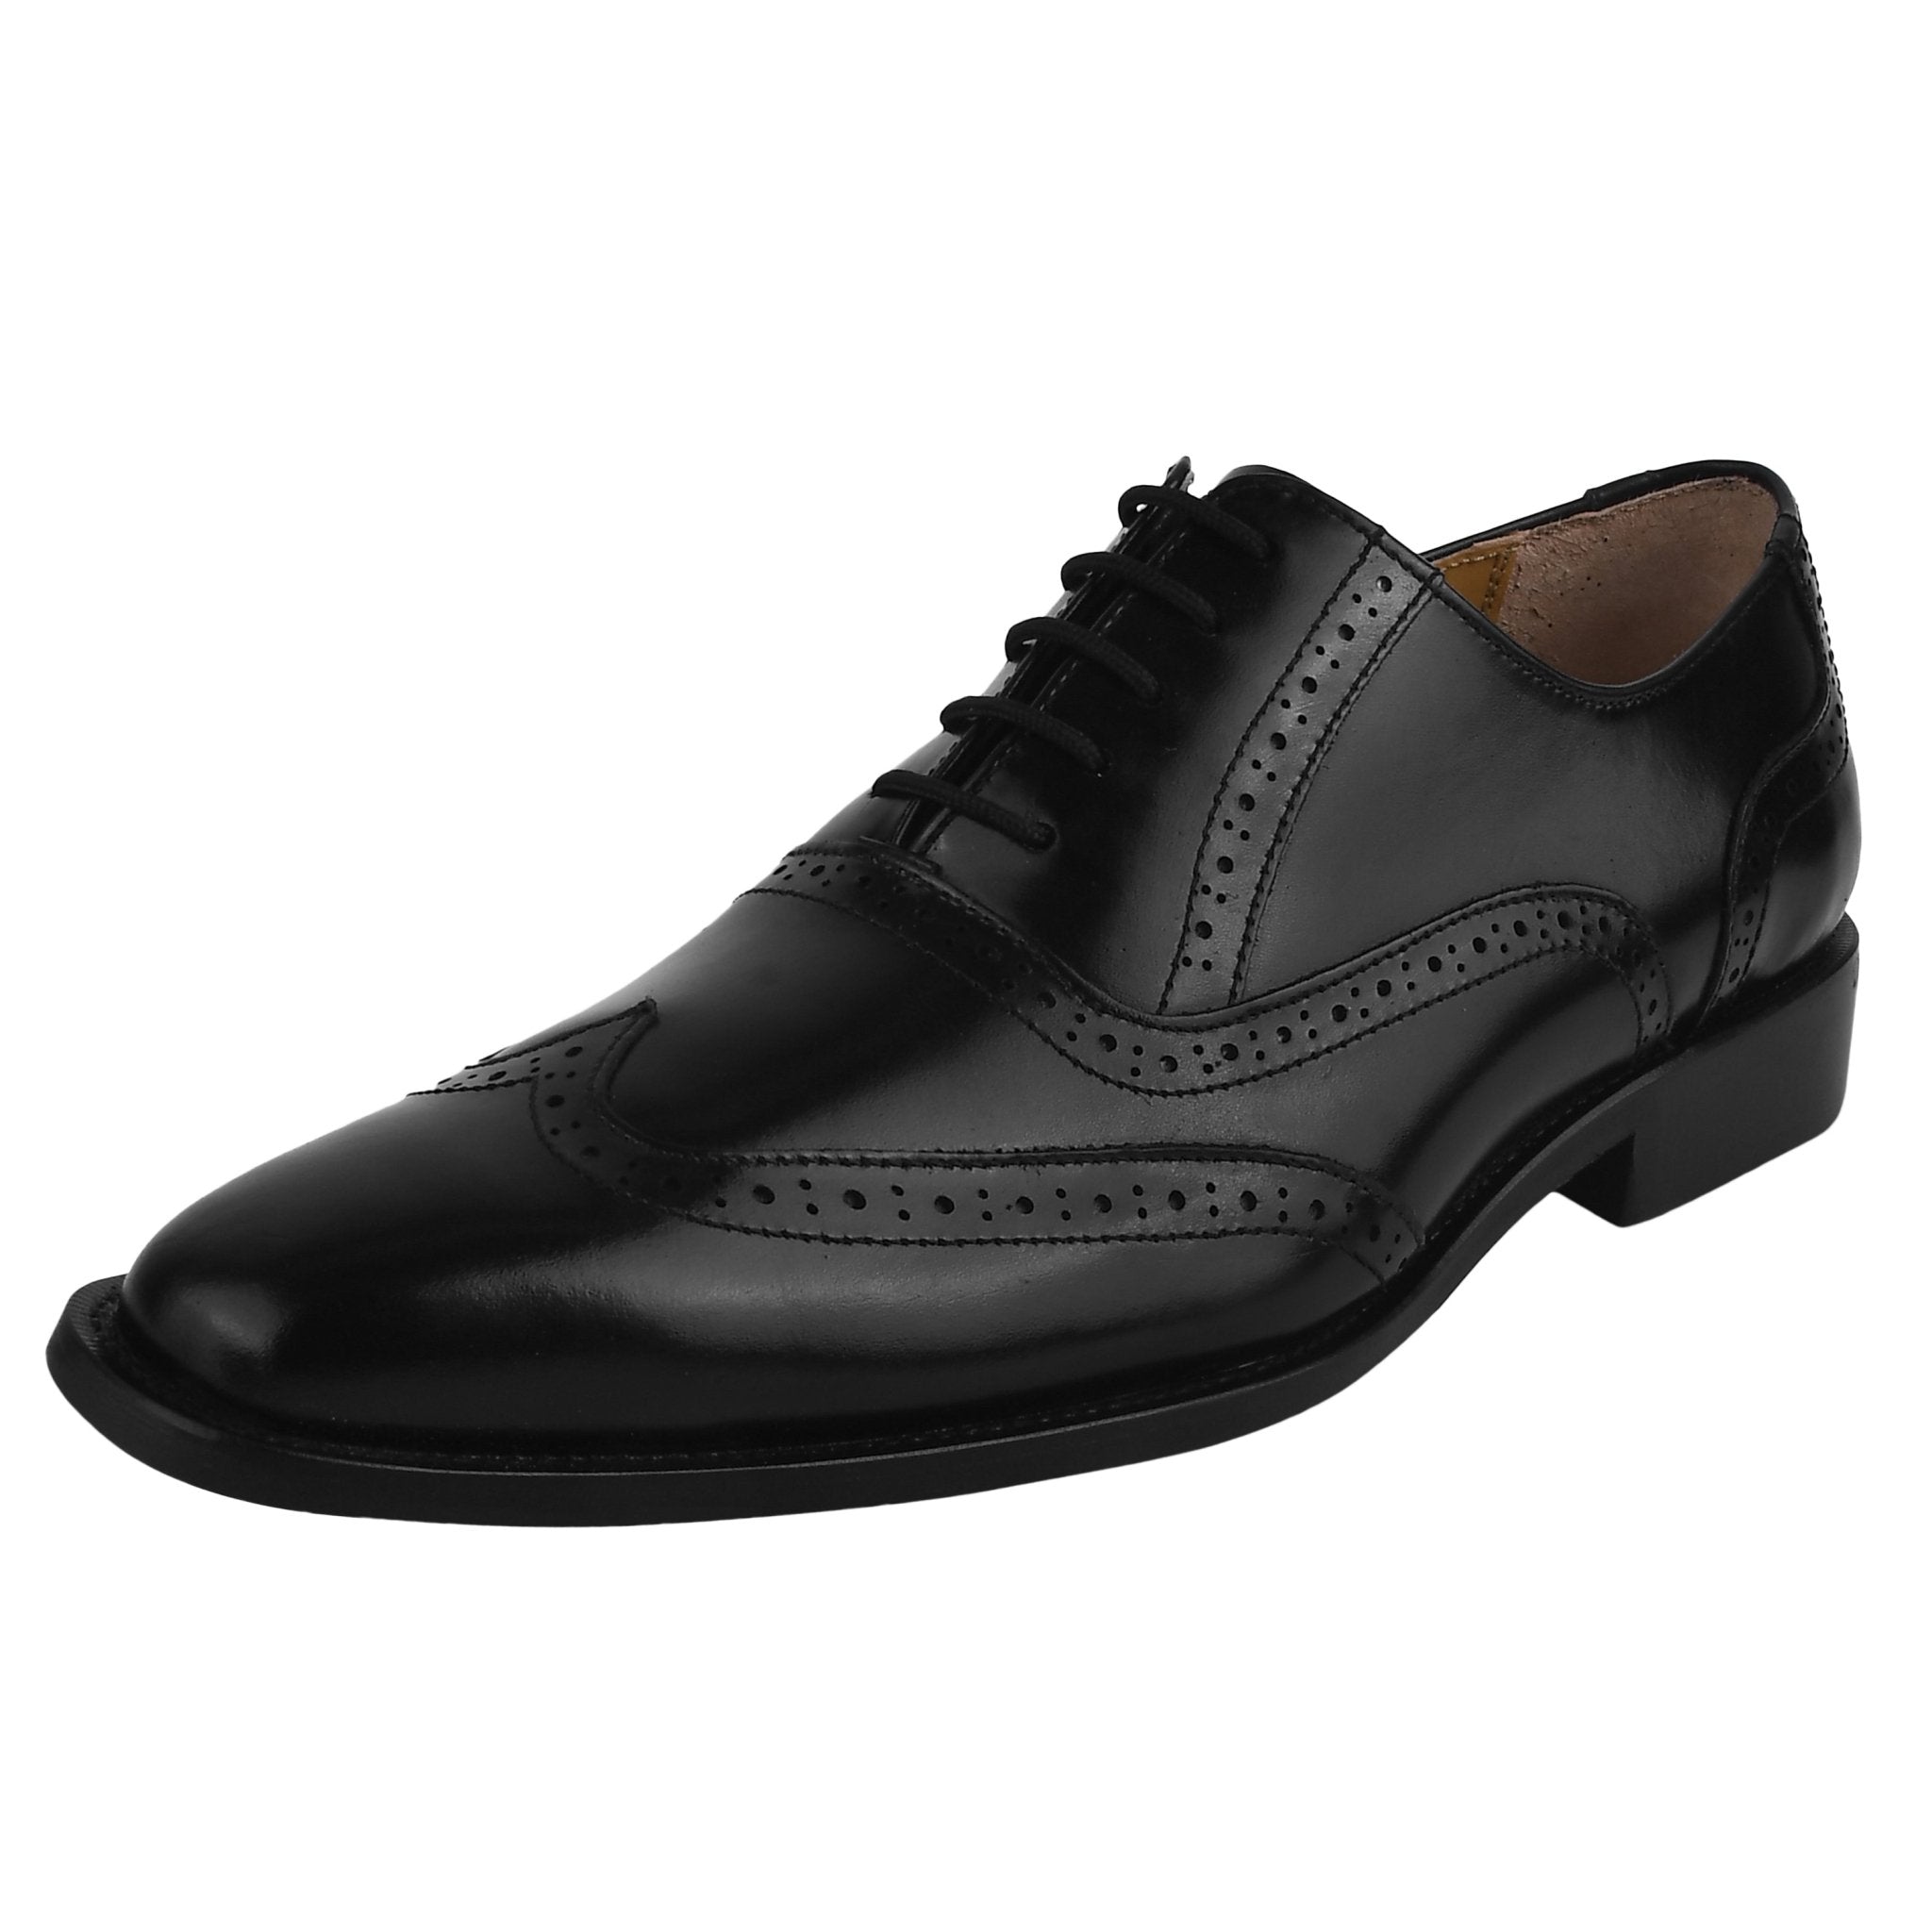 Sharon Genuine Leather Oxford Style Mens Dress Shoes